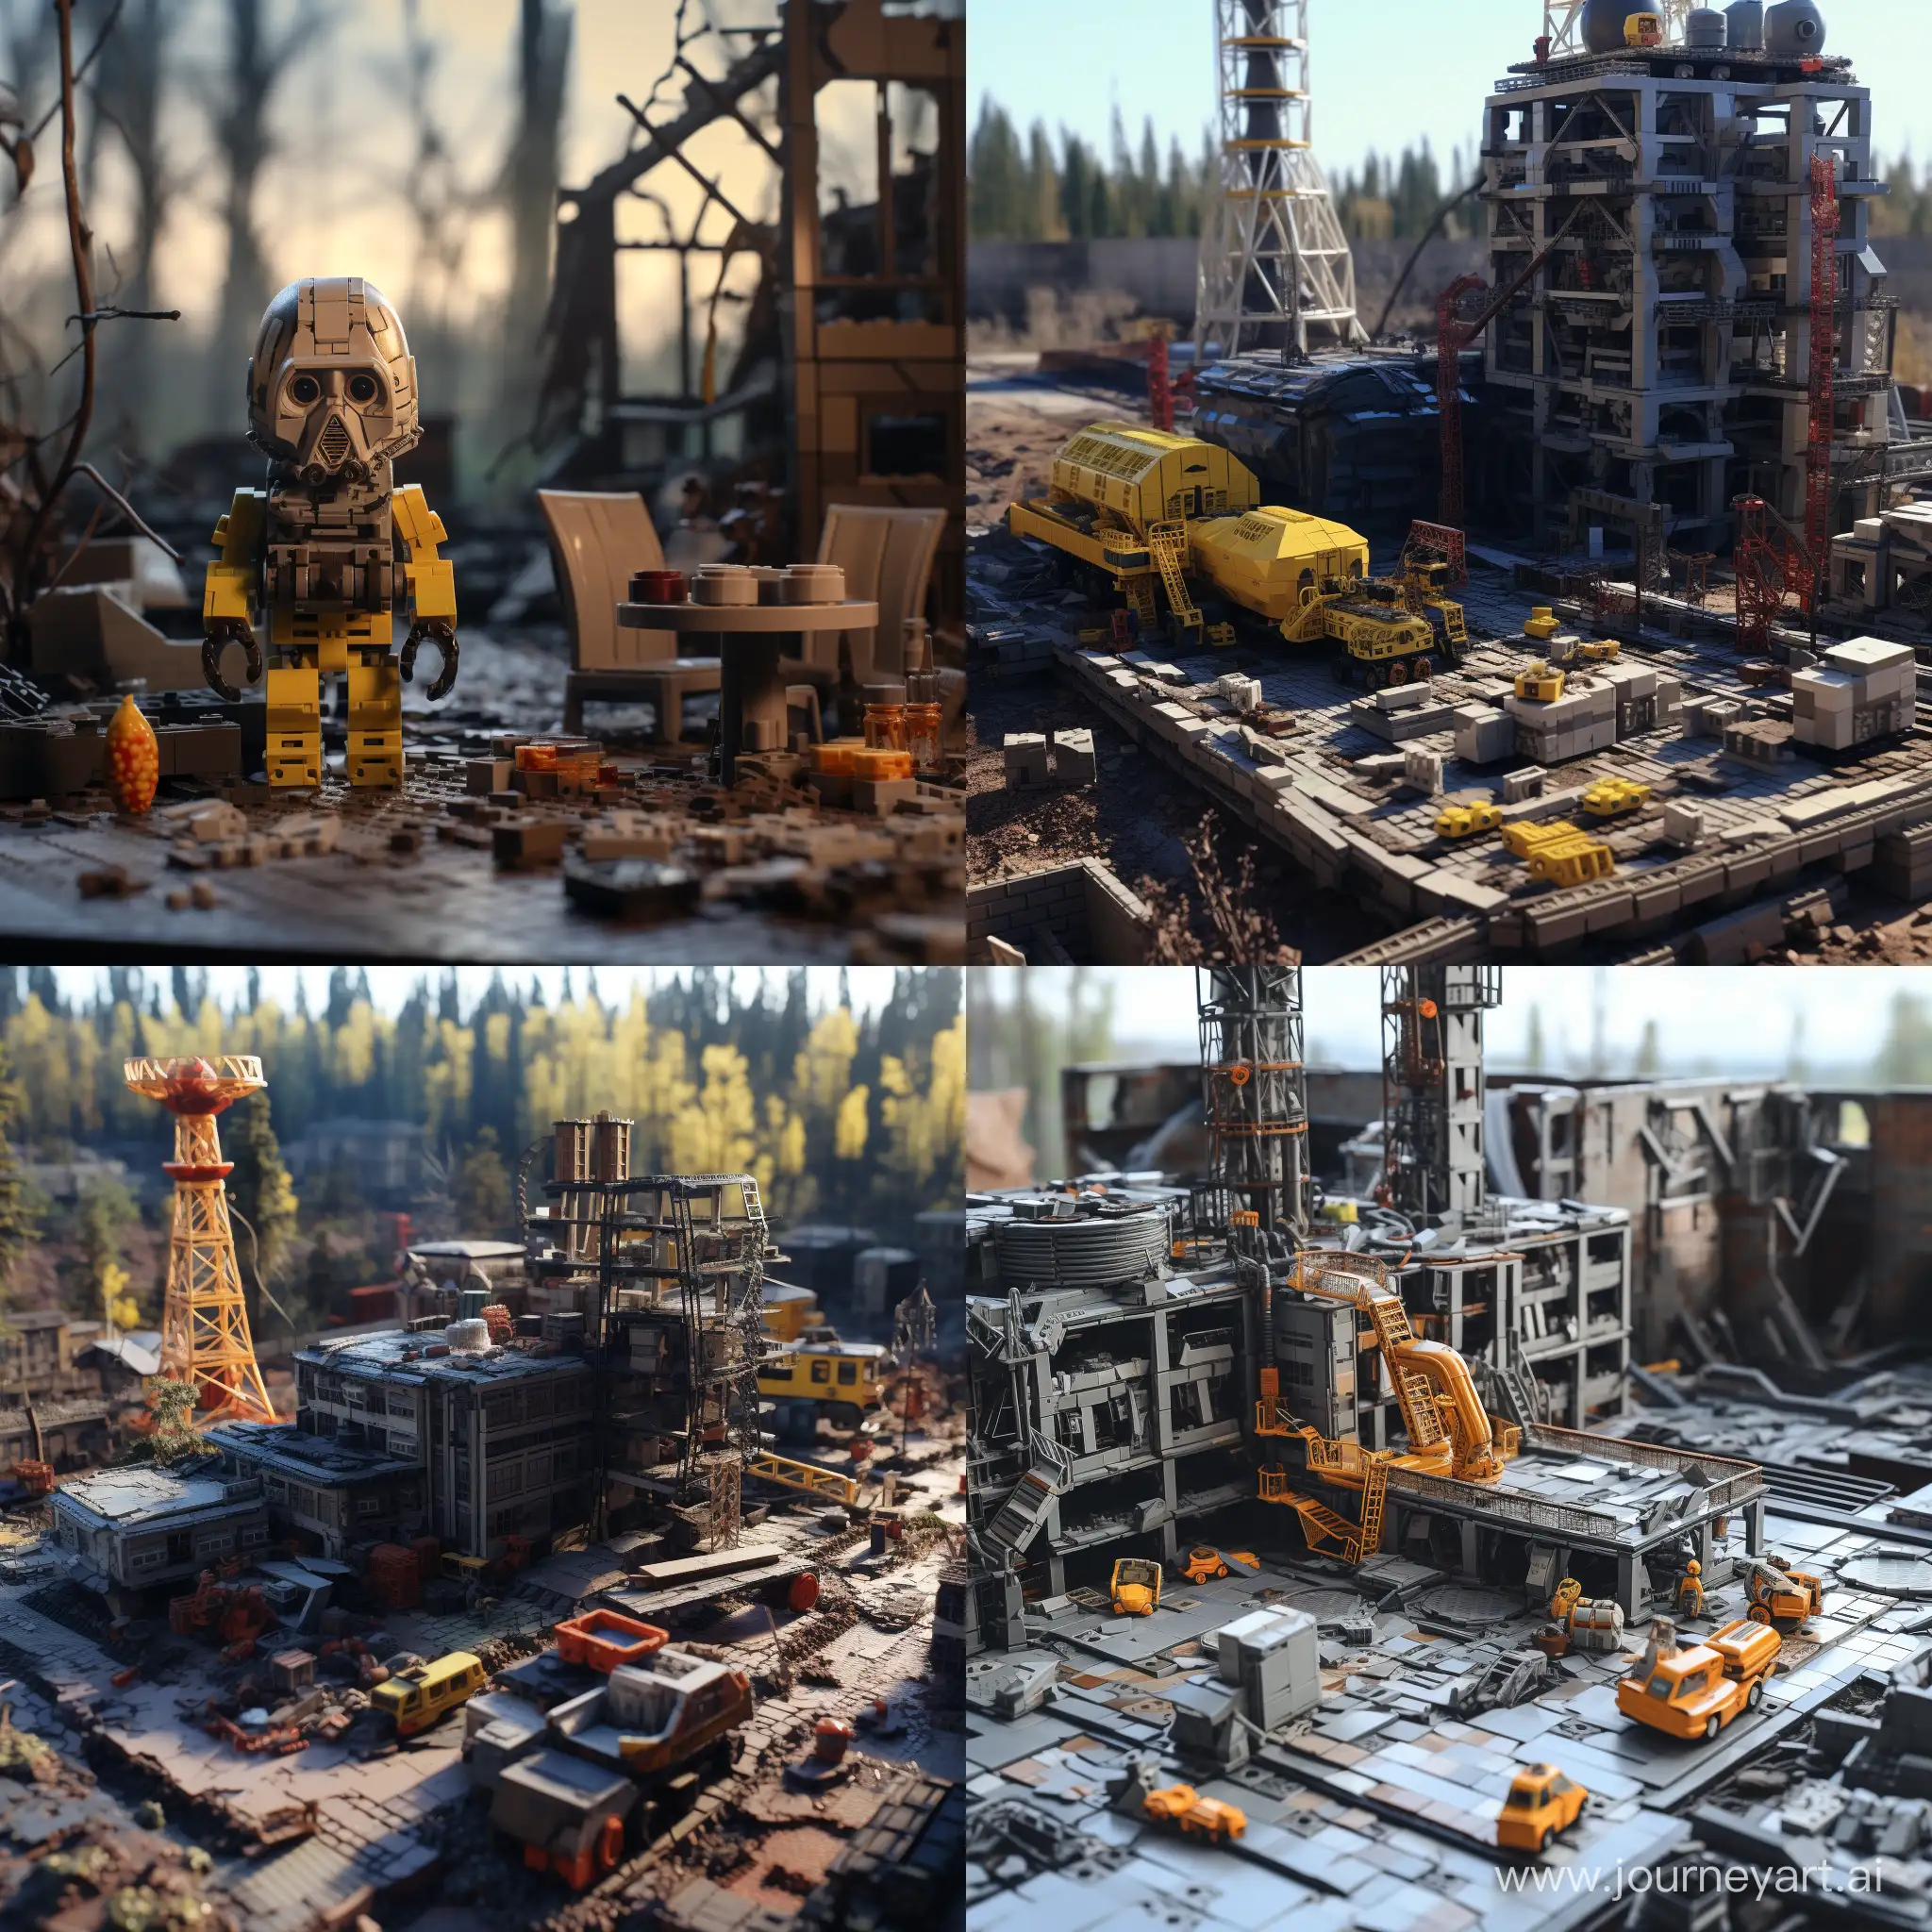 generate an image of chernobyl lego set